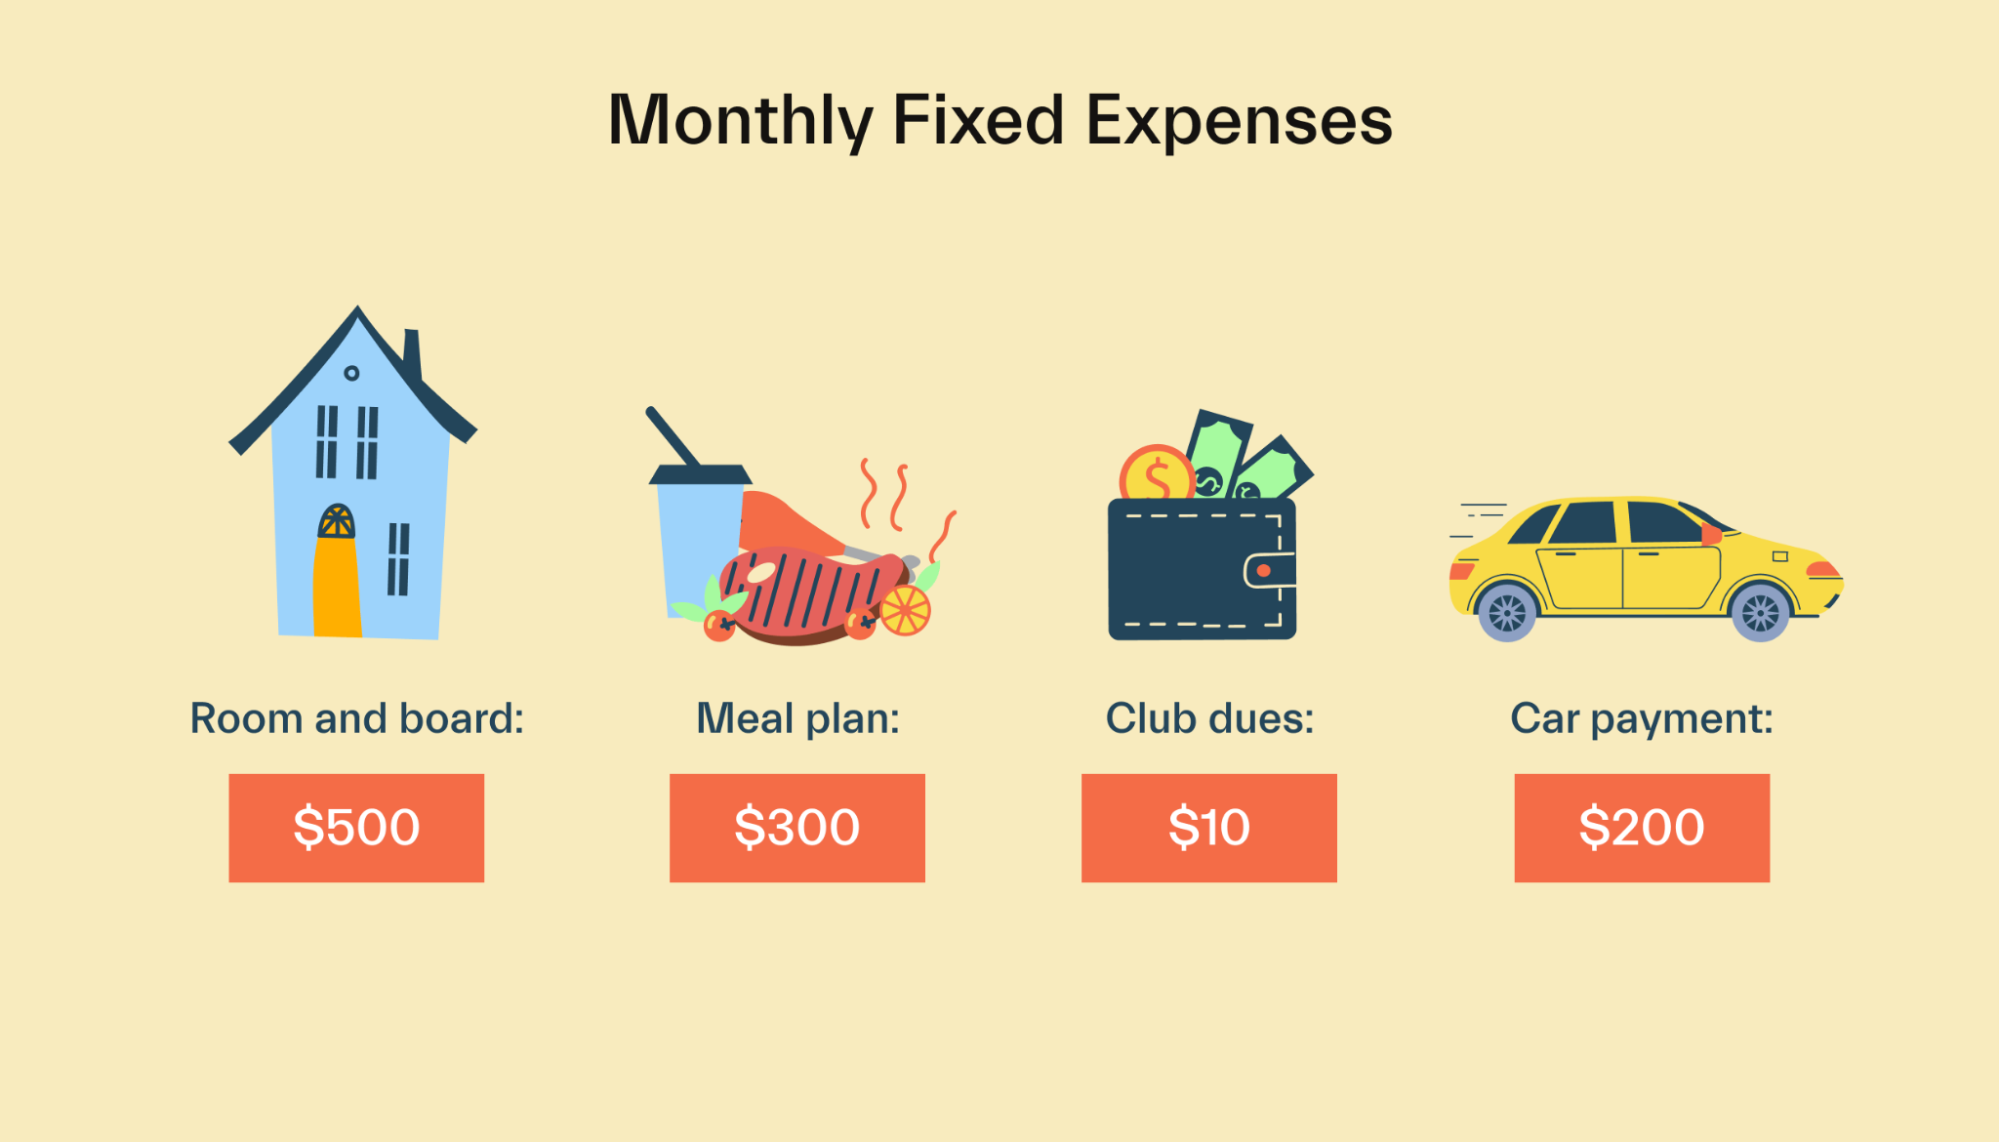 Fixed expenses